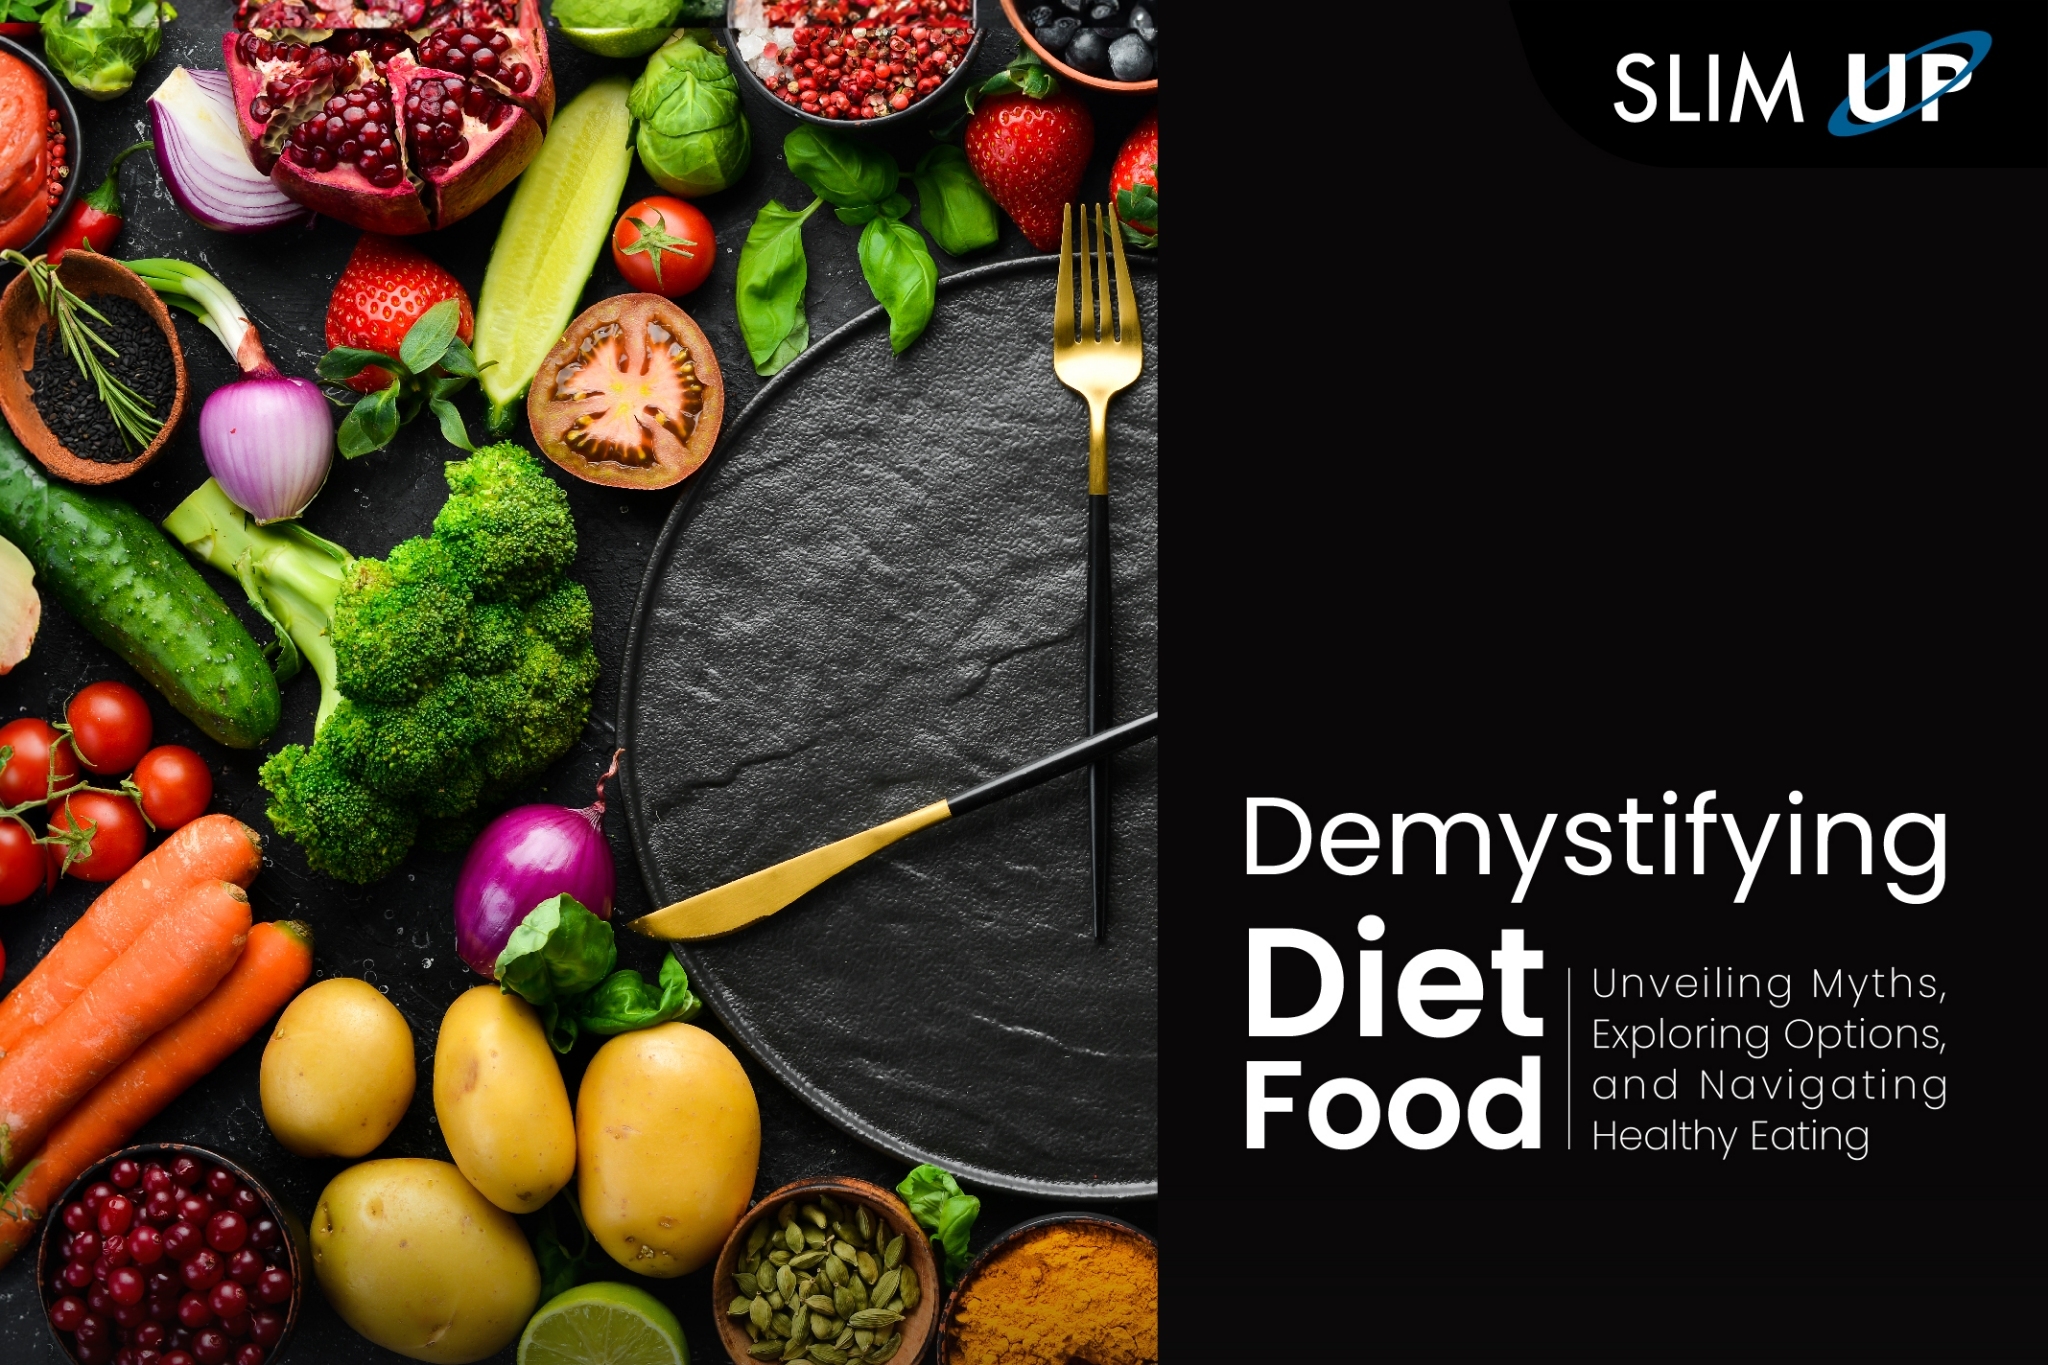 Demystifying Diet Food: Unveiling Myths, Exploring Options, and Navigating Healthy Eating